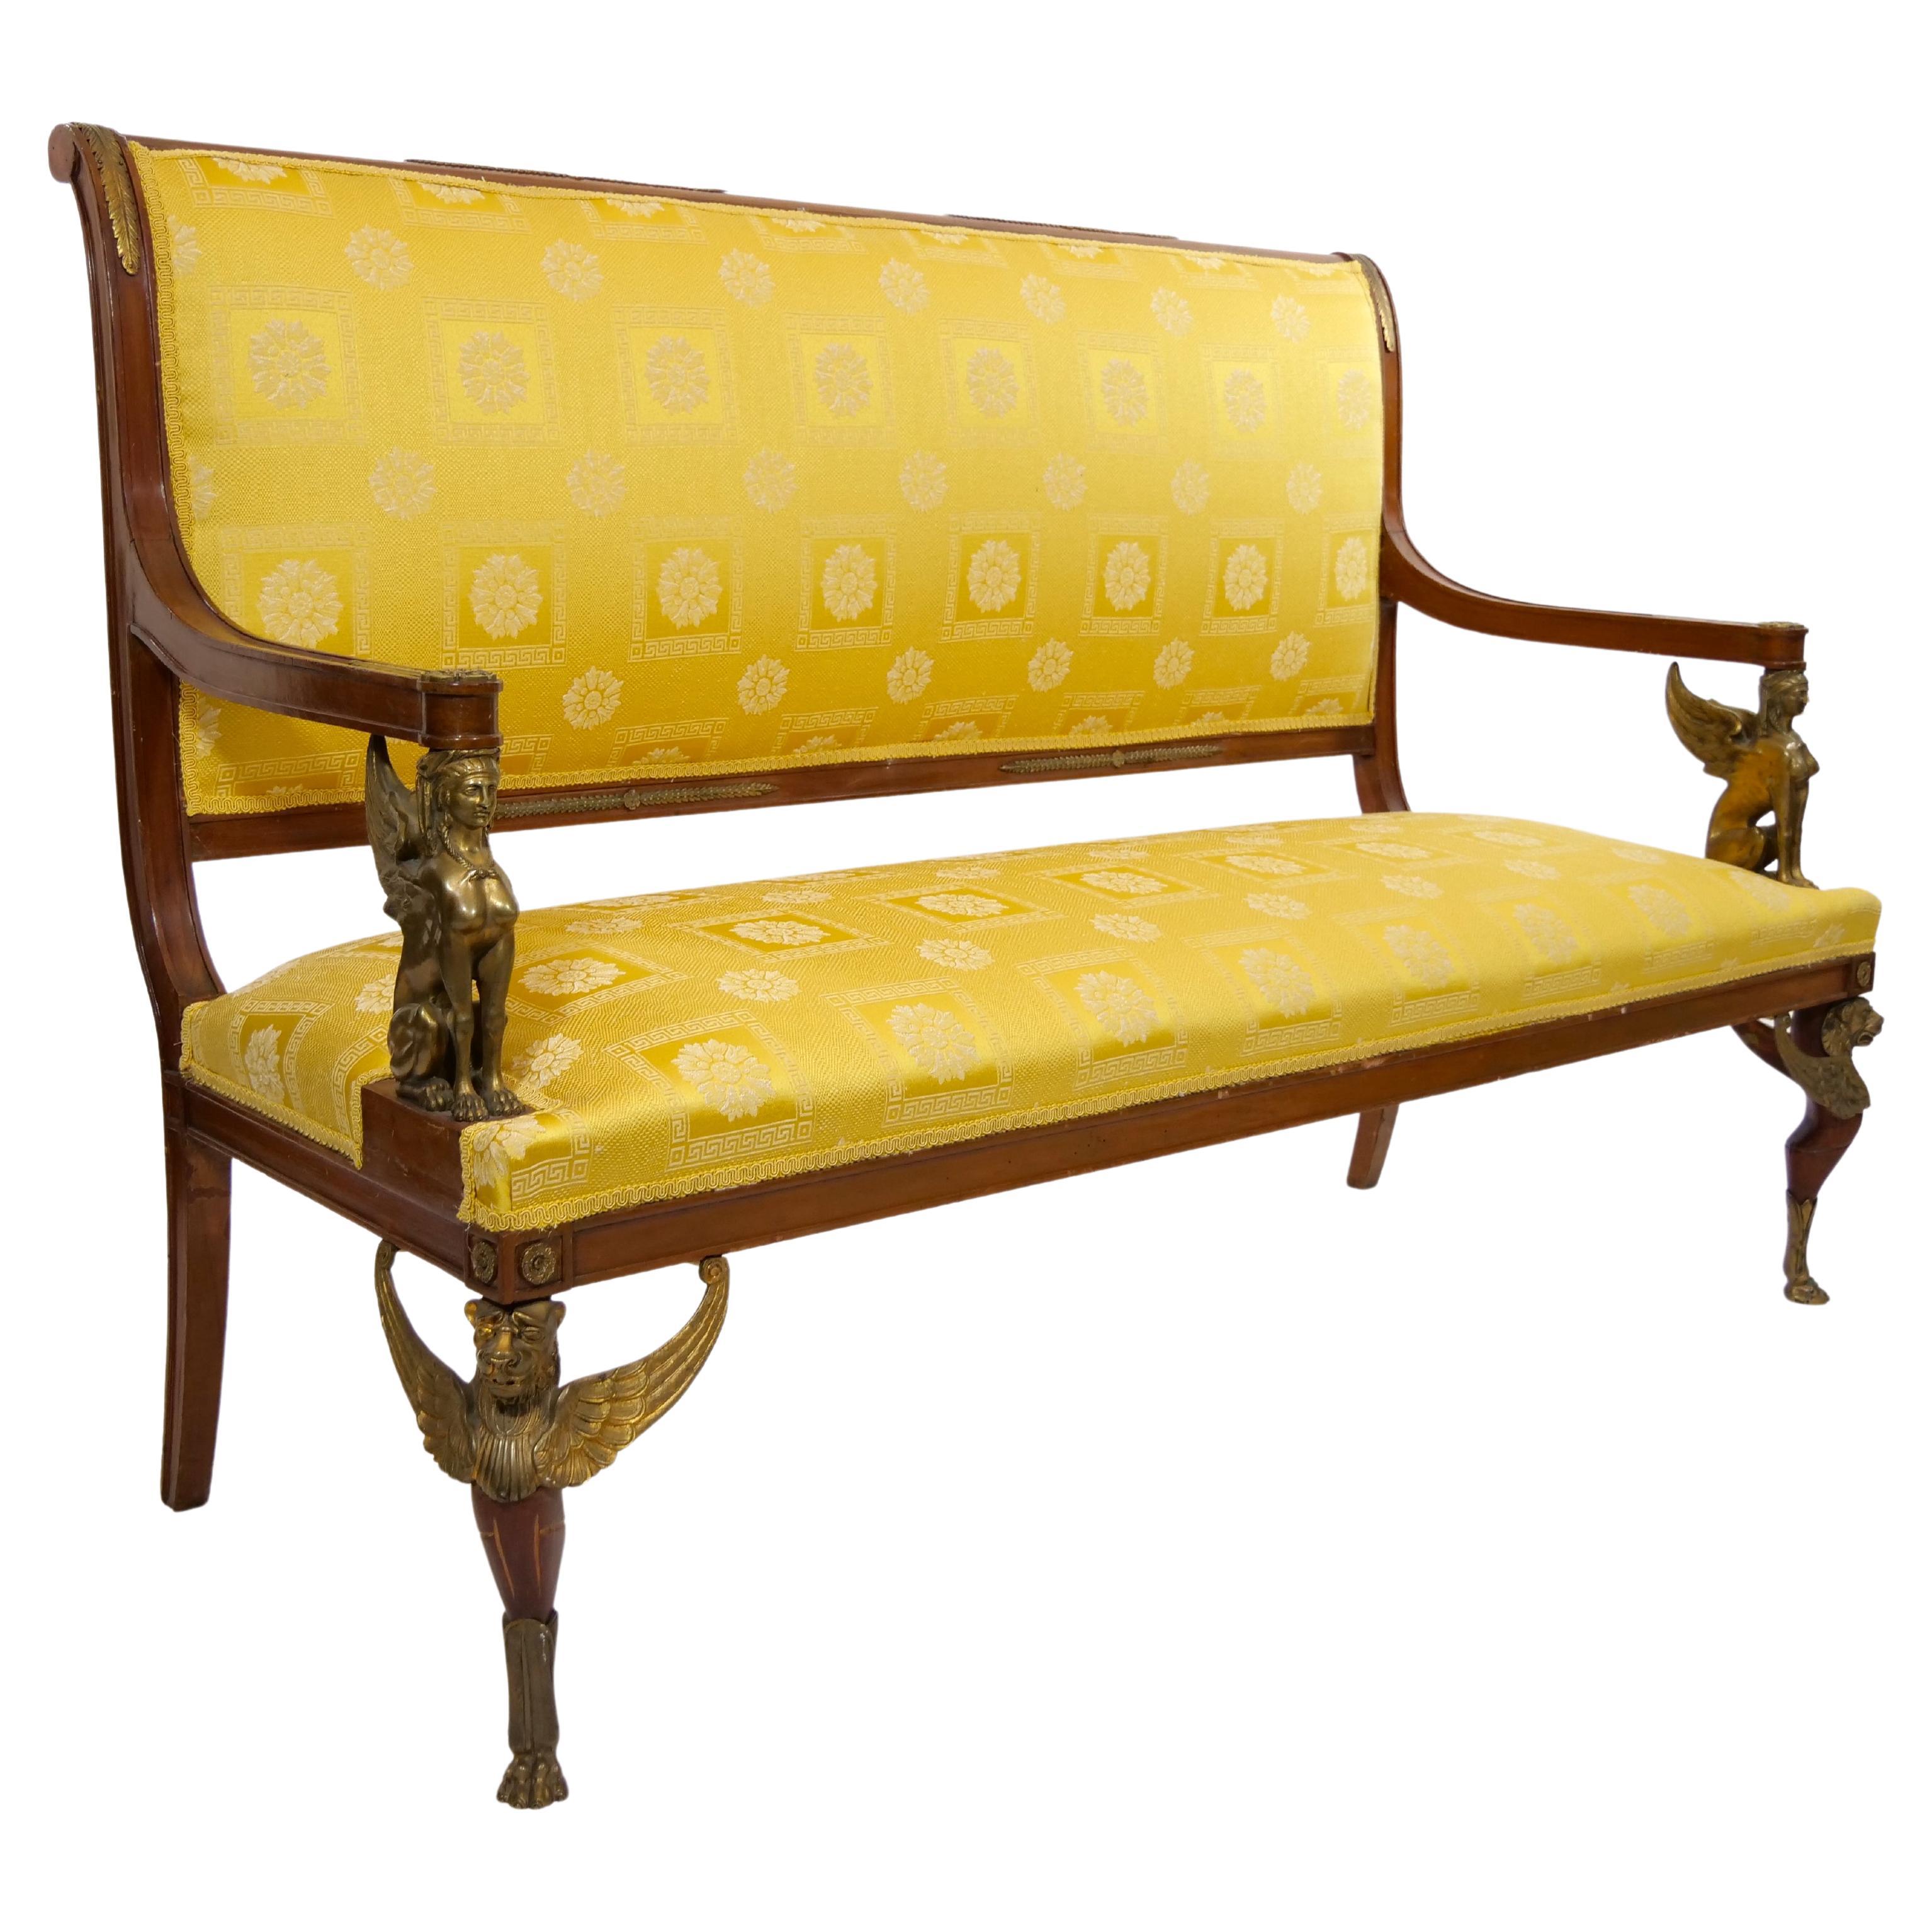 19th century French Empire style handcrafted gilt bronze mahogany framed upholstered settee / sofa. The settee features four straight mahogany legs, the front two of which are set on gilt bronze paw feet and Gilt bronze sphinxes serve as arm rests,